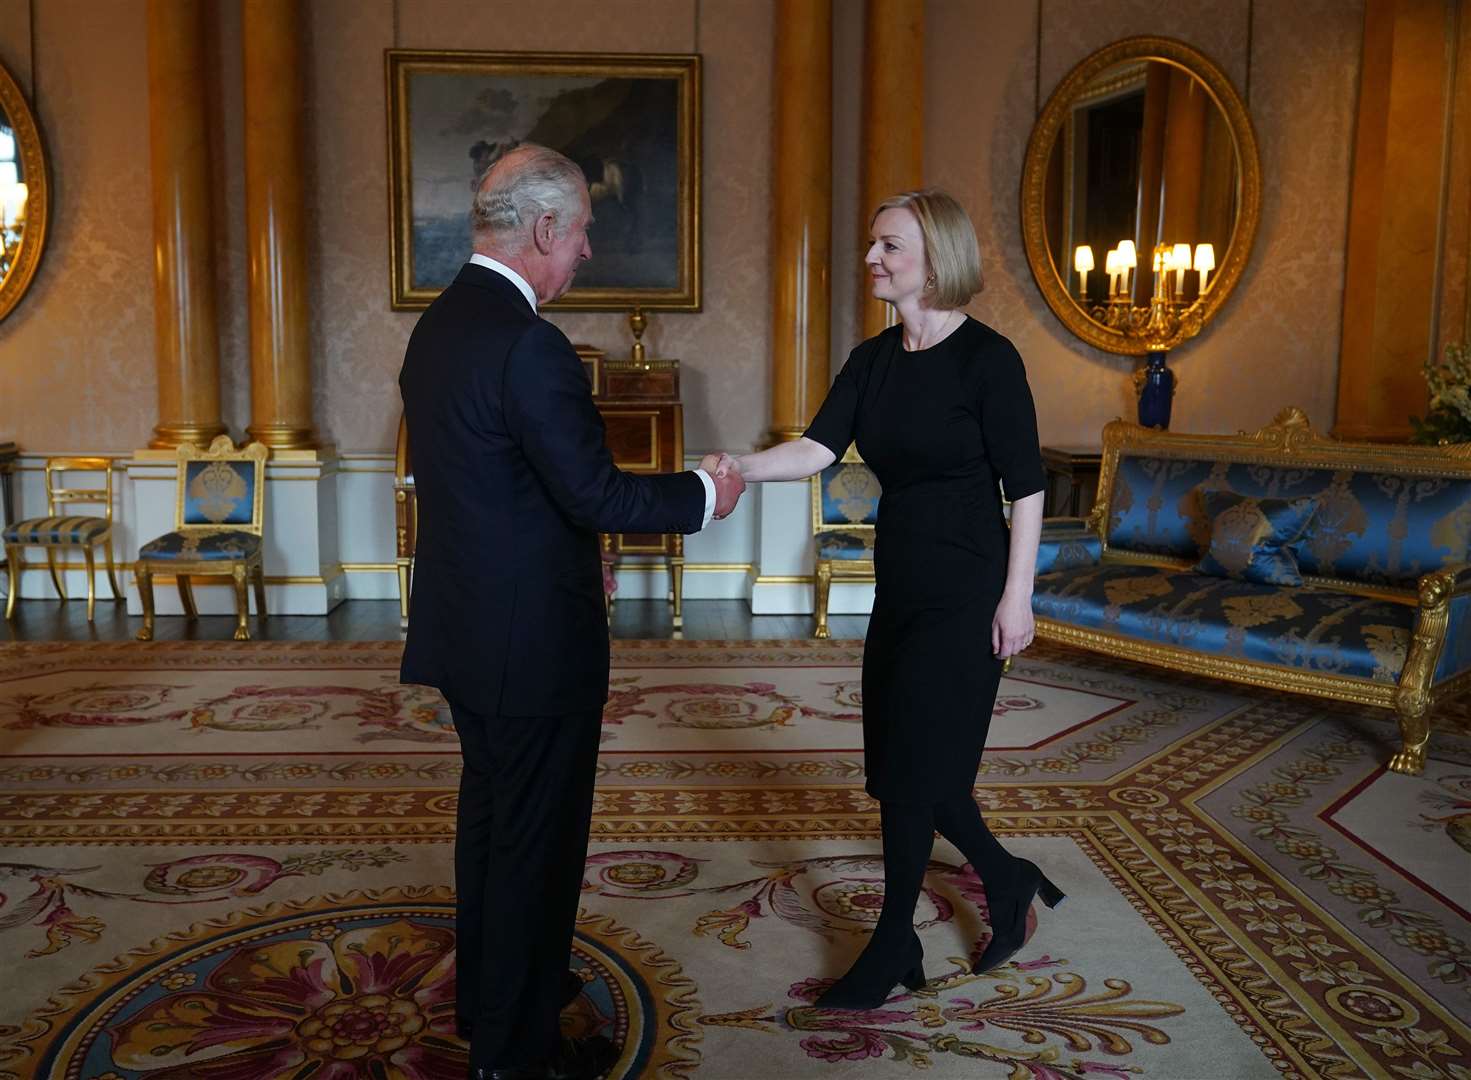 The King shakes hands with Prime Minister Liz Truss during their first audience at Buckingham Palace (Yui Mok/PA)